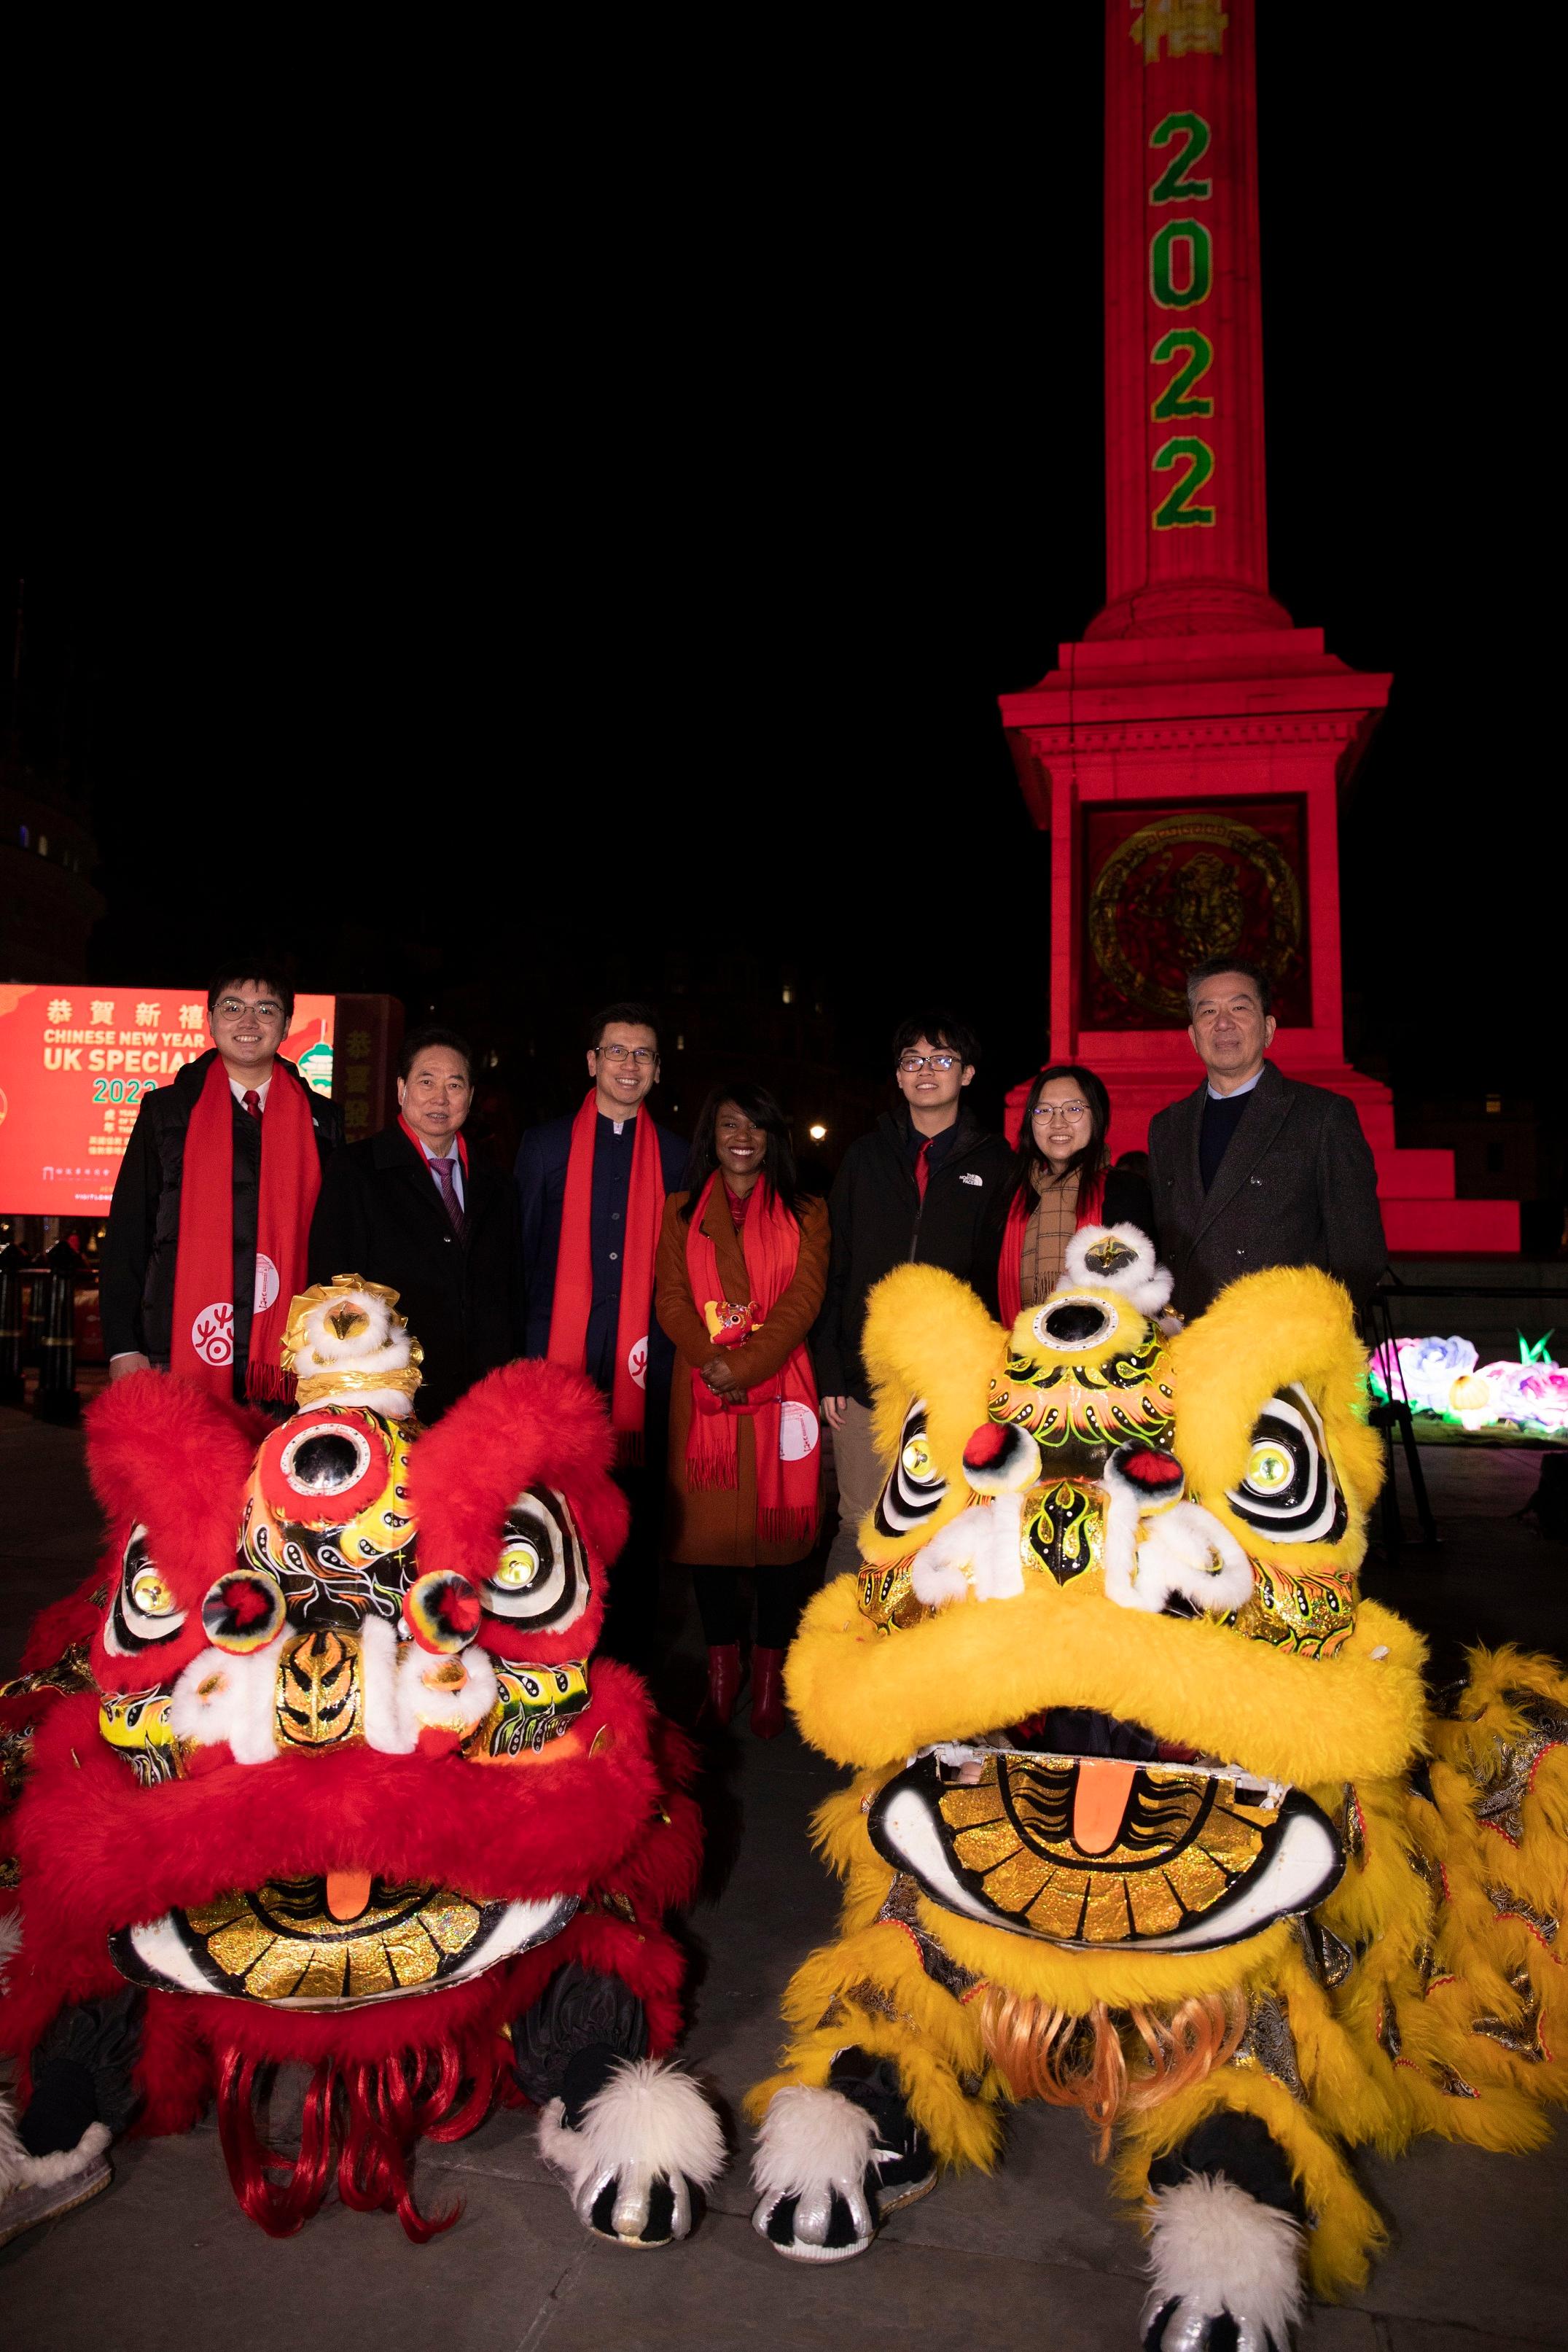 London ETO celebrates Chinese New Year amid pandemic. In end-January, the Director-General of London ETO, Mr Gilford Law (third left) attended a Chinese New Year celebration event with Deputy Mayor of London, Debbie Weekes-Bernard (centre) and Hong Kong students, which was organised by the London Chinatown Chinese Association at Trafalgar Square together.